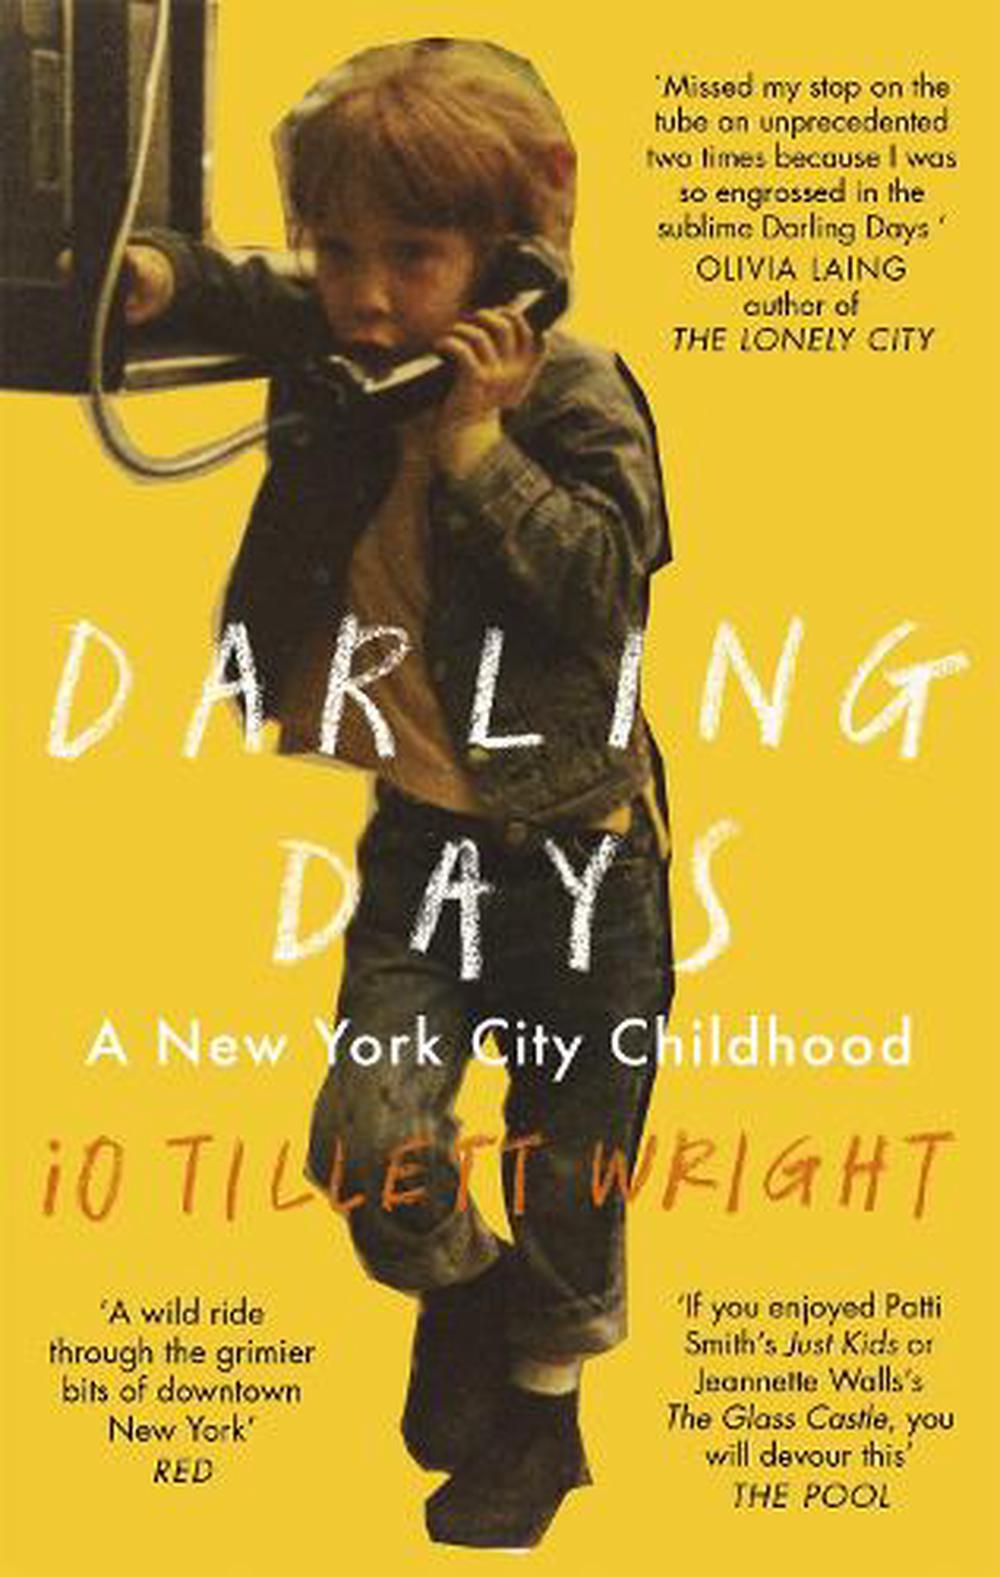 9780349005638　The　Nile　online　Tillett　Buy　Darling　Paperback,　Wright,　Io　by　Days　at